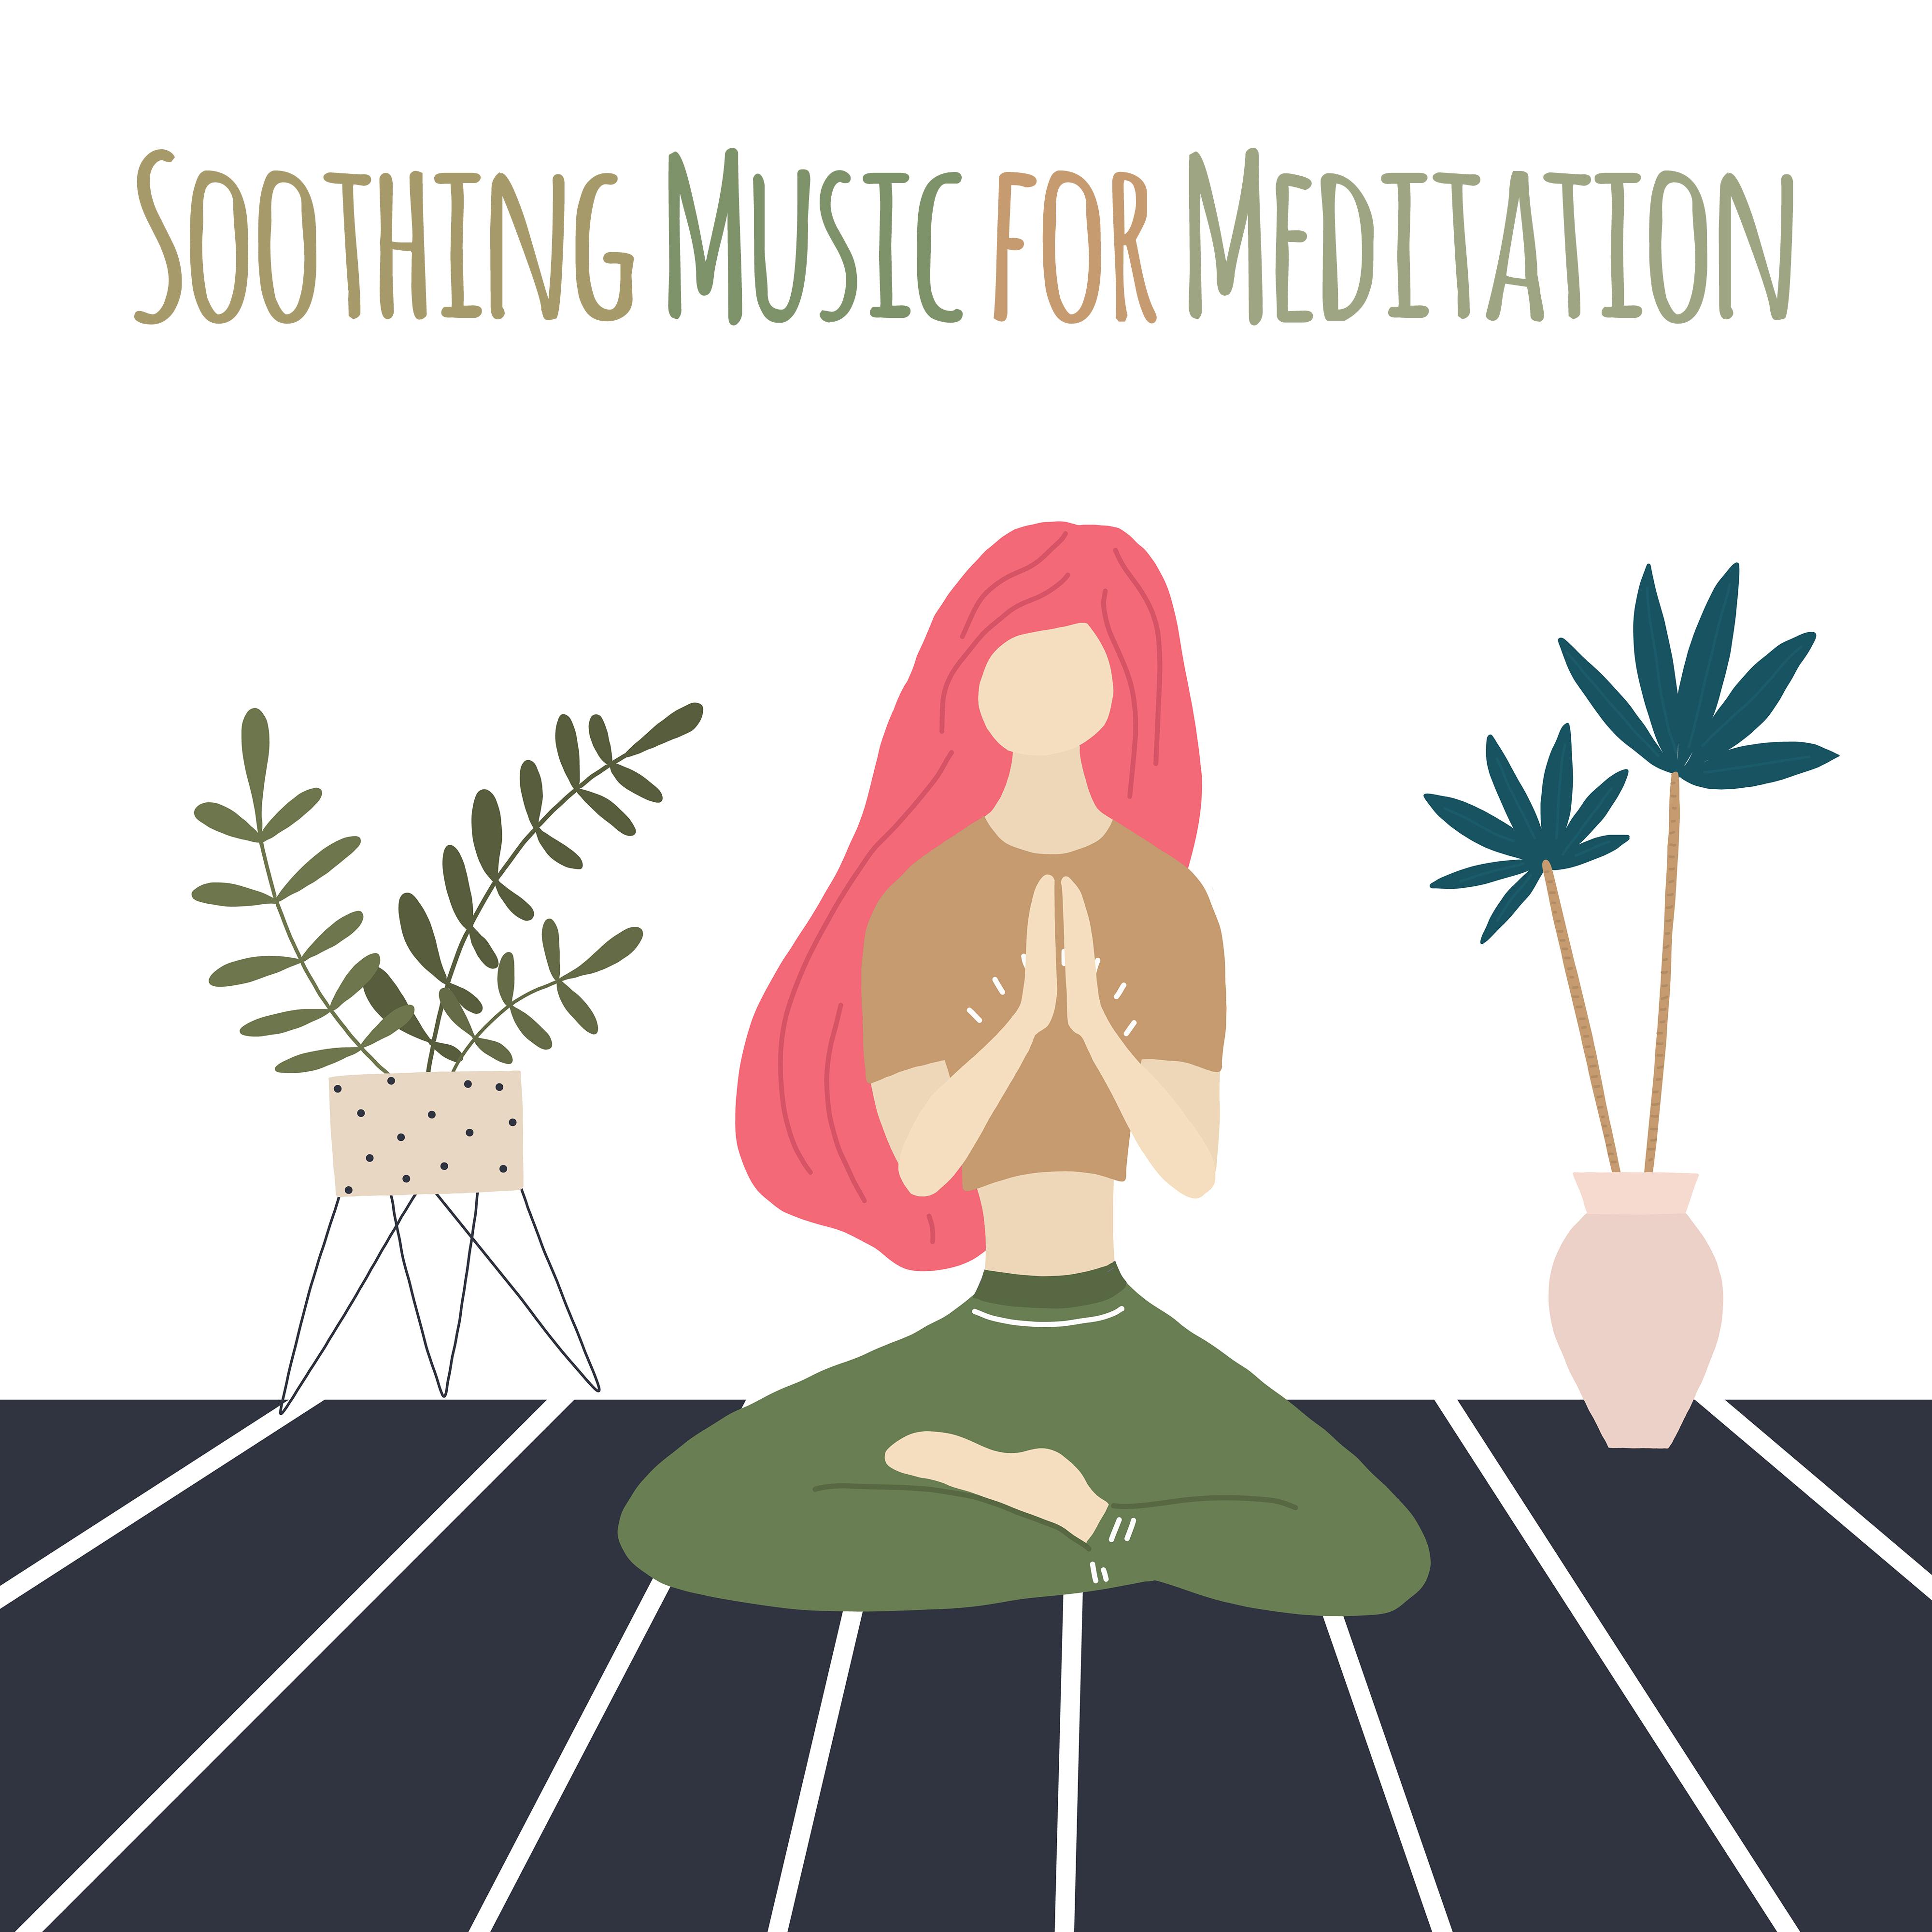 Soothing Music for Meditation - 15 Gentle Songs Perfect for the Practice of Meditation and Contemplation